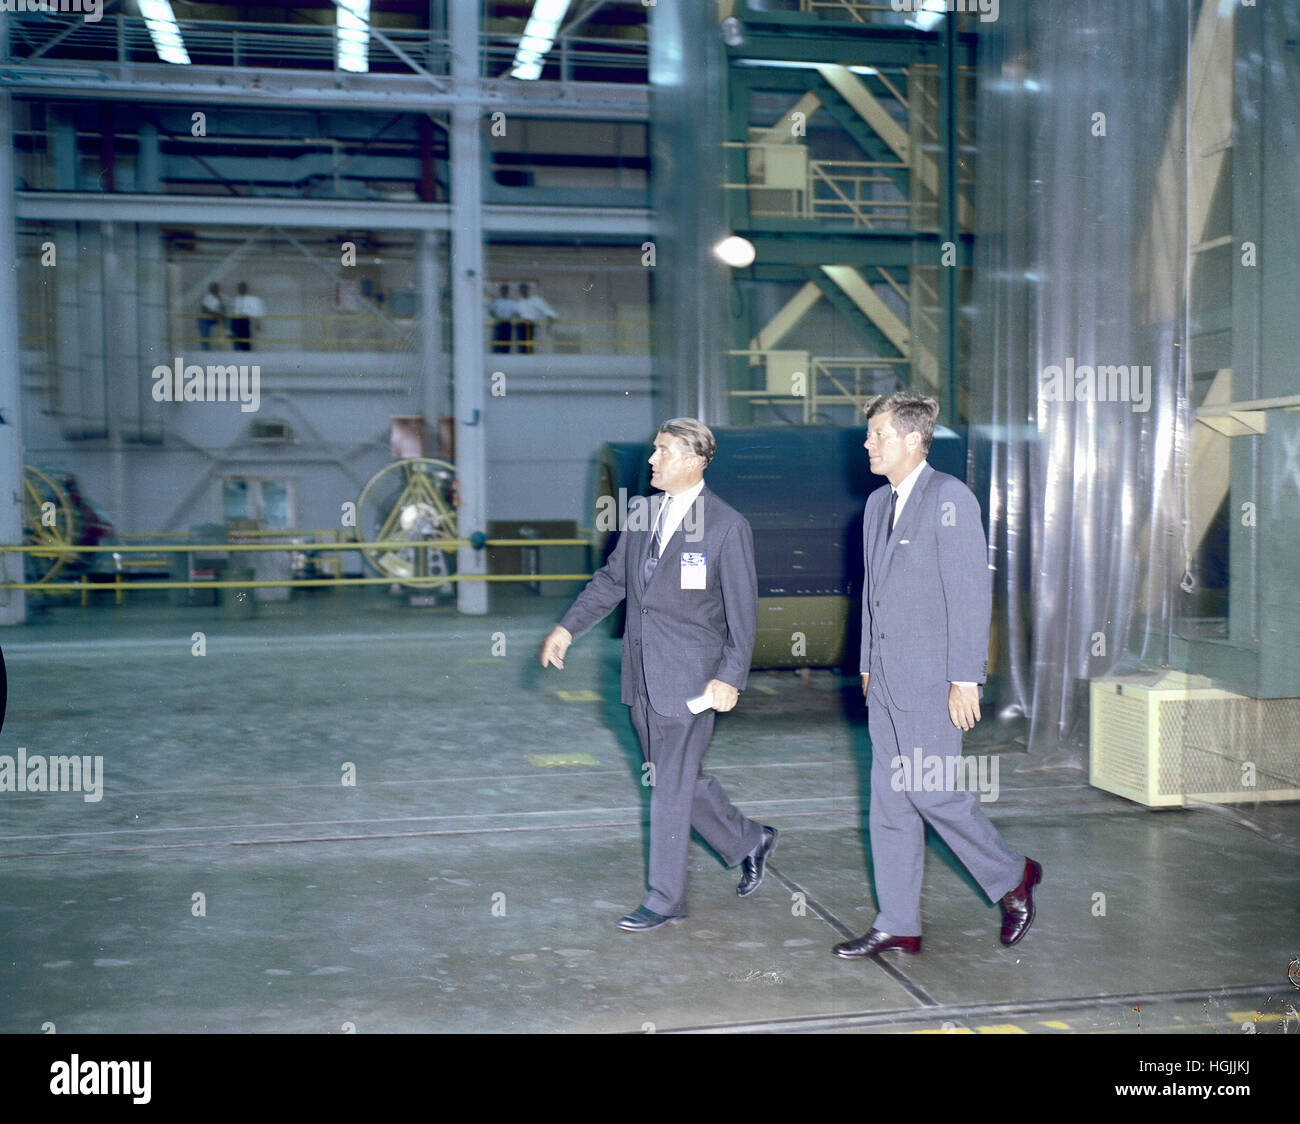 United States President John F. Kennedy visited Marshall Space Flight Center (MSFC) in Huntsville, Alabama on September 11, 1962. Here President Kennedy and Dr. Wernher von Braun, MSFC Director, tour one of the laboratories.Credit: NASA via CNP - NO WIRE SERVICE - Photo: Nasa/Consolidated News Photos/NASA via CNP Stock Photo